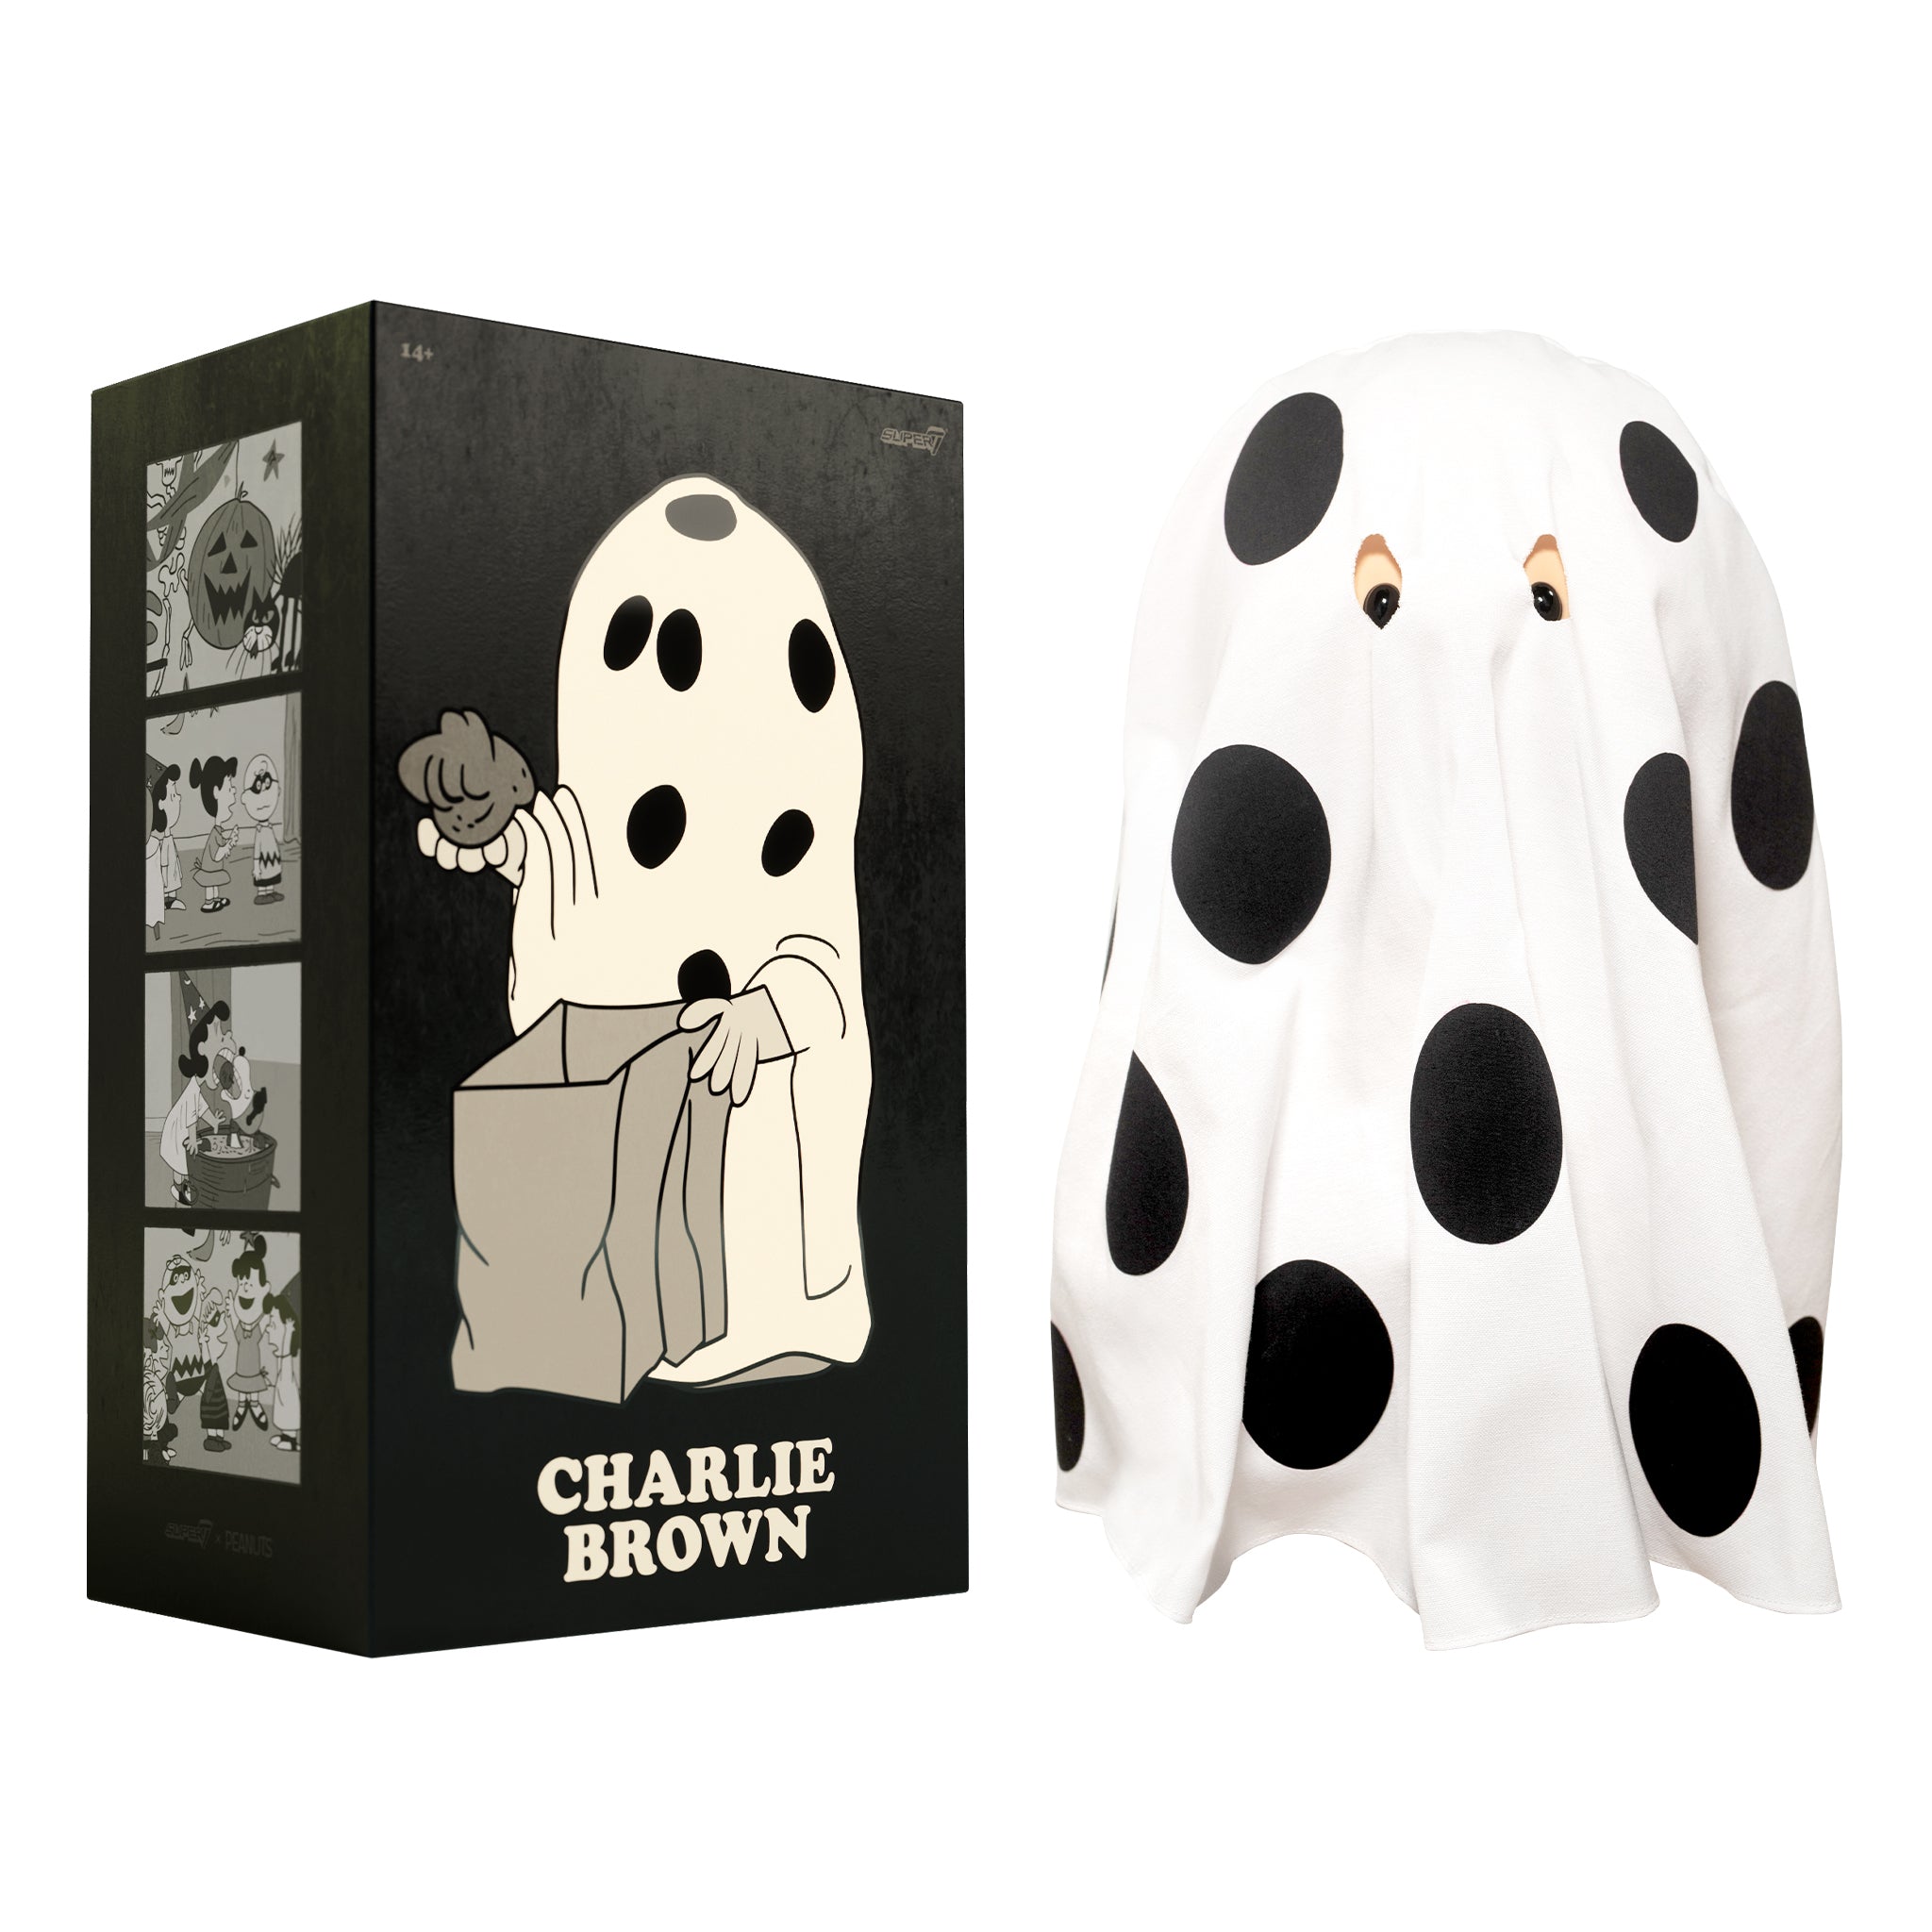 Peanuts Supersize  - Charlie Brown (Ghost Sheet)